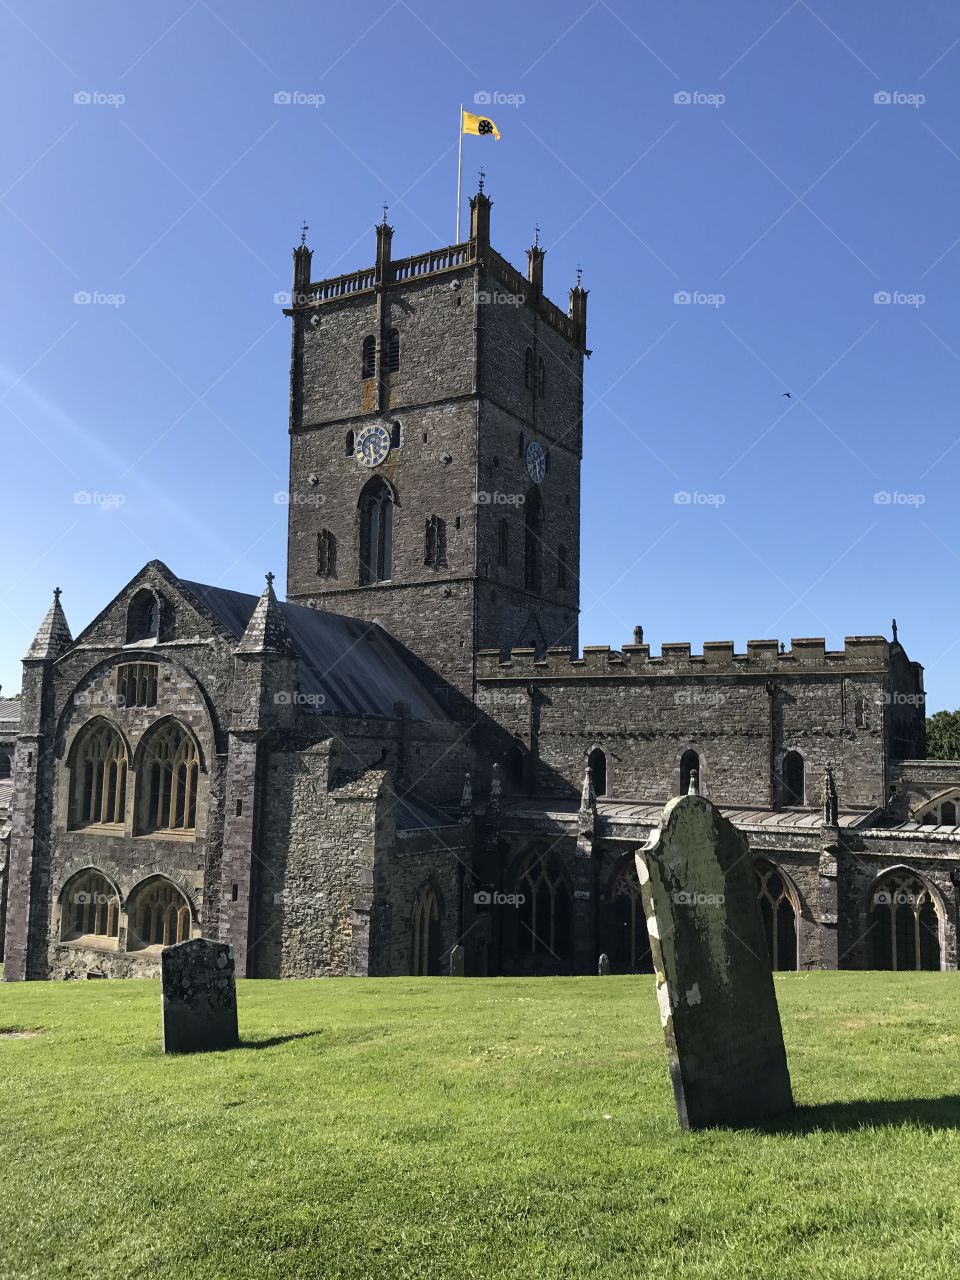 St David's Cathedral
